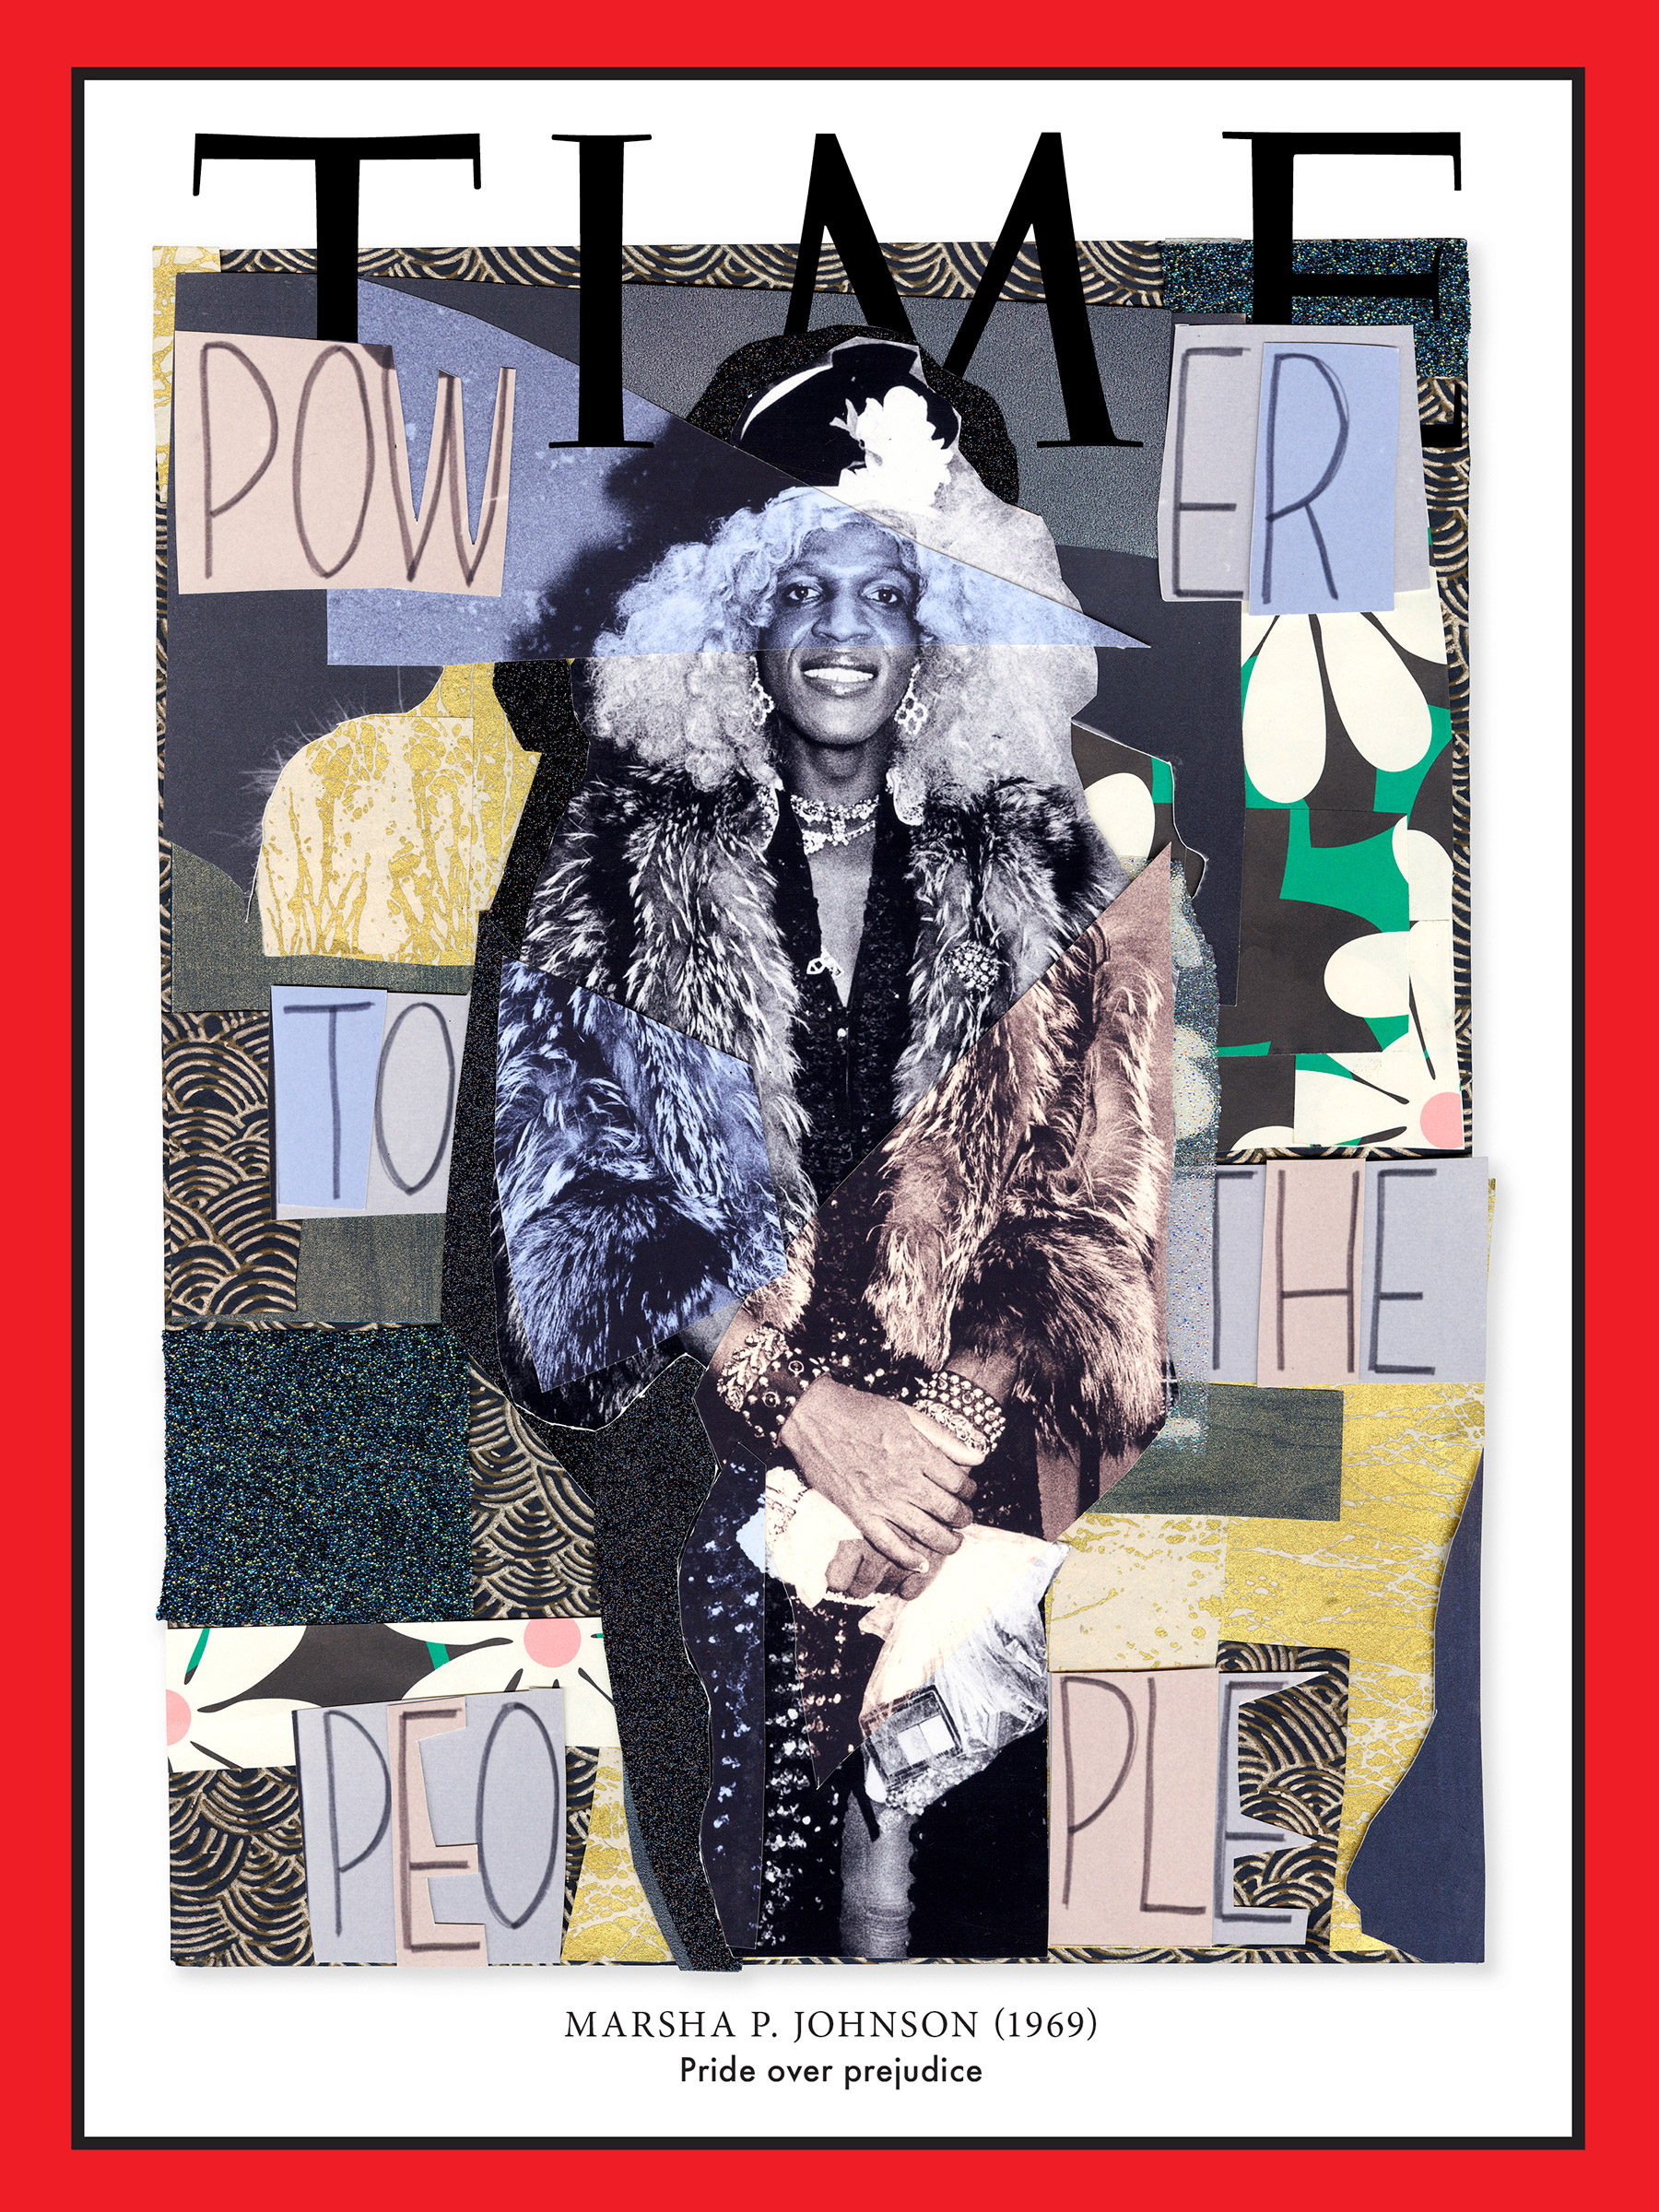 <a href="https://fineartamerica.com/featured/marsha-p-johnson-1969-time.html"><strong>Buy the cover art→</strong></a> (Art by Mickalene Thomas for TIME; Johnson: Arlene Gottfried—Daniel Cooney Fine Art; Sign: Diana Davies © NYPL/Art Resource, NY)